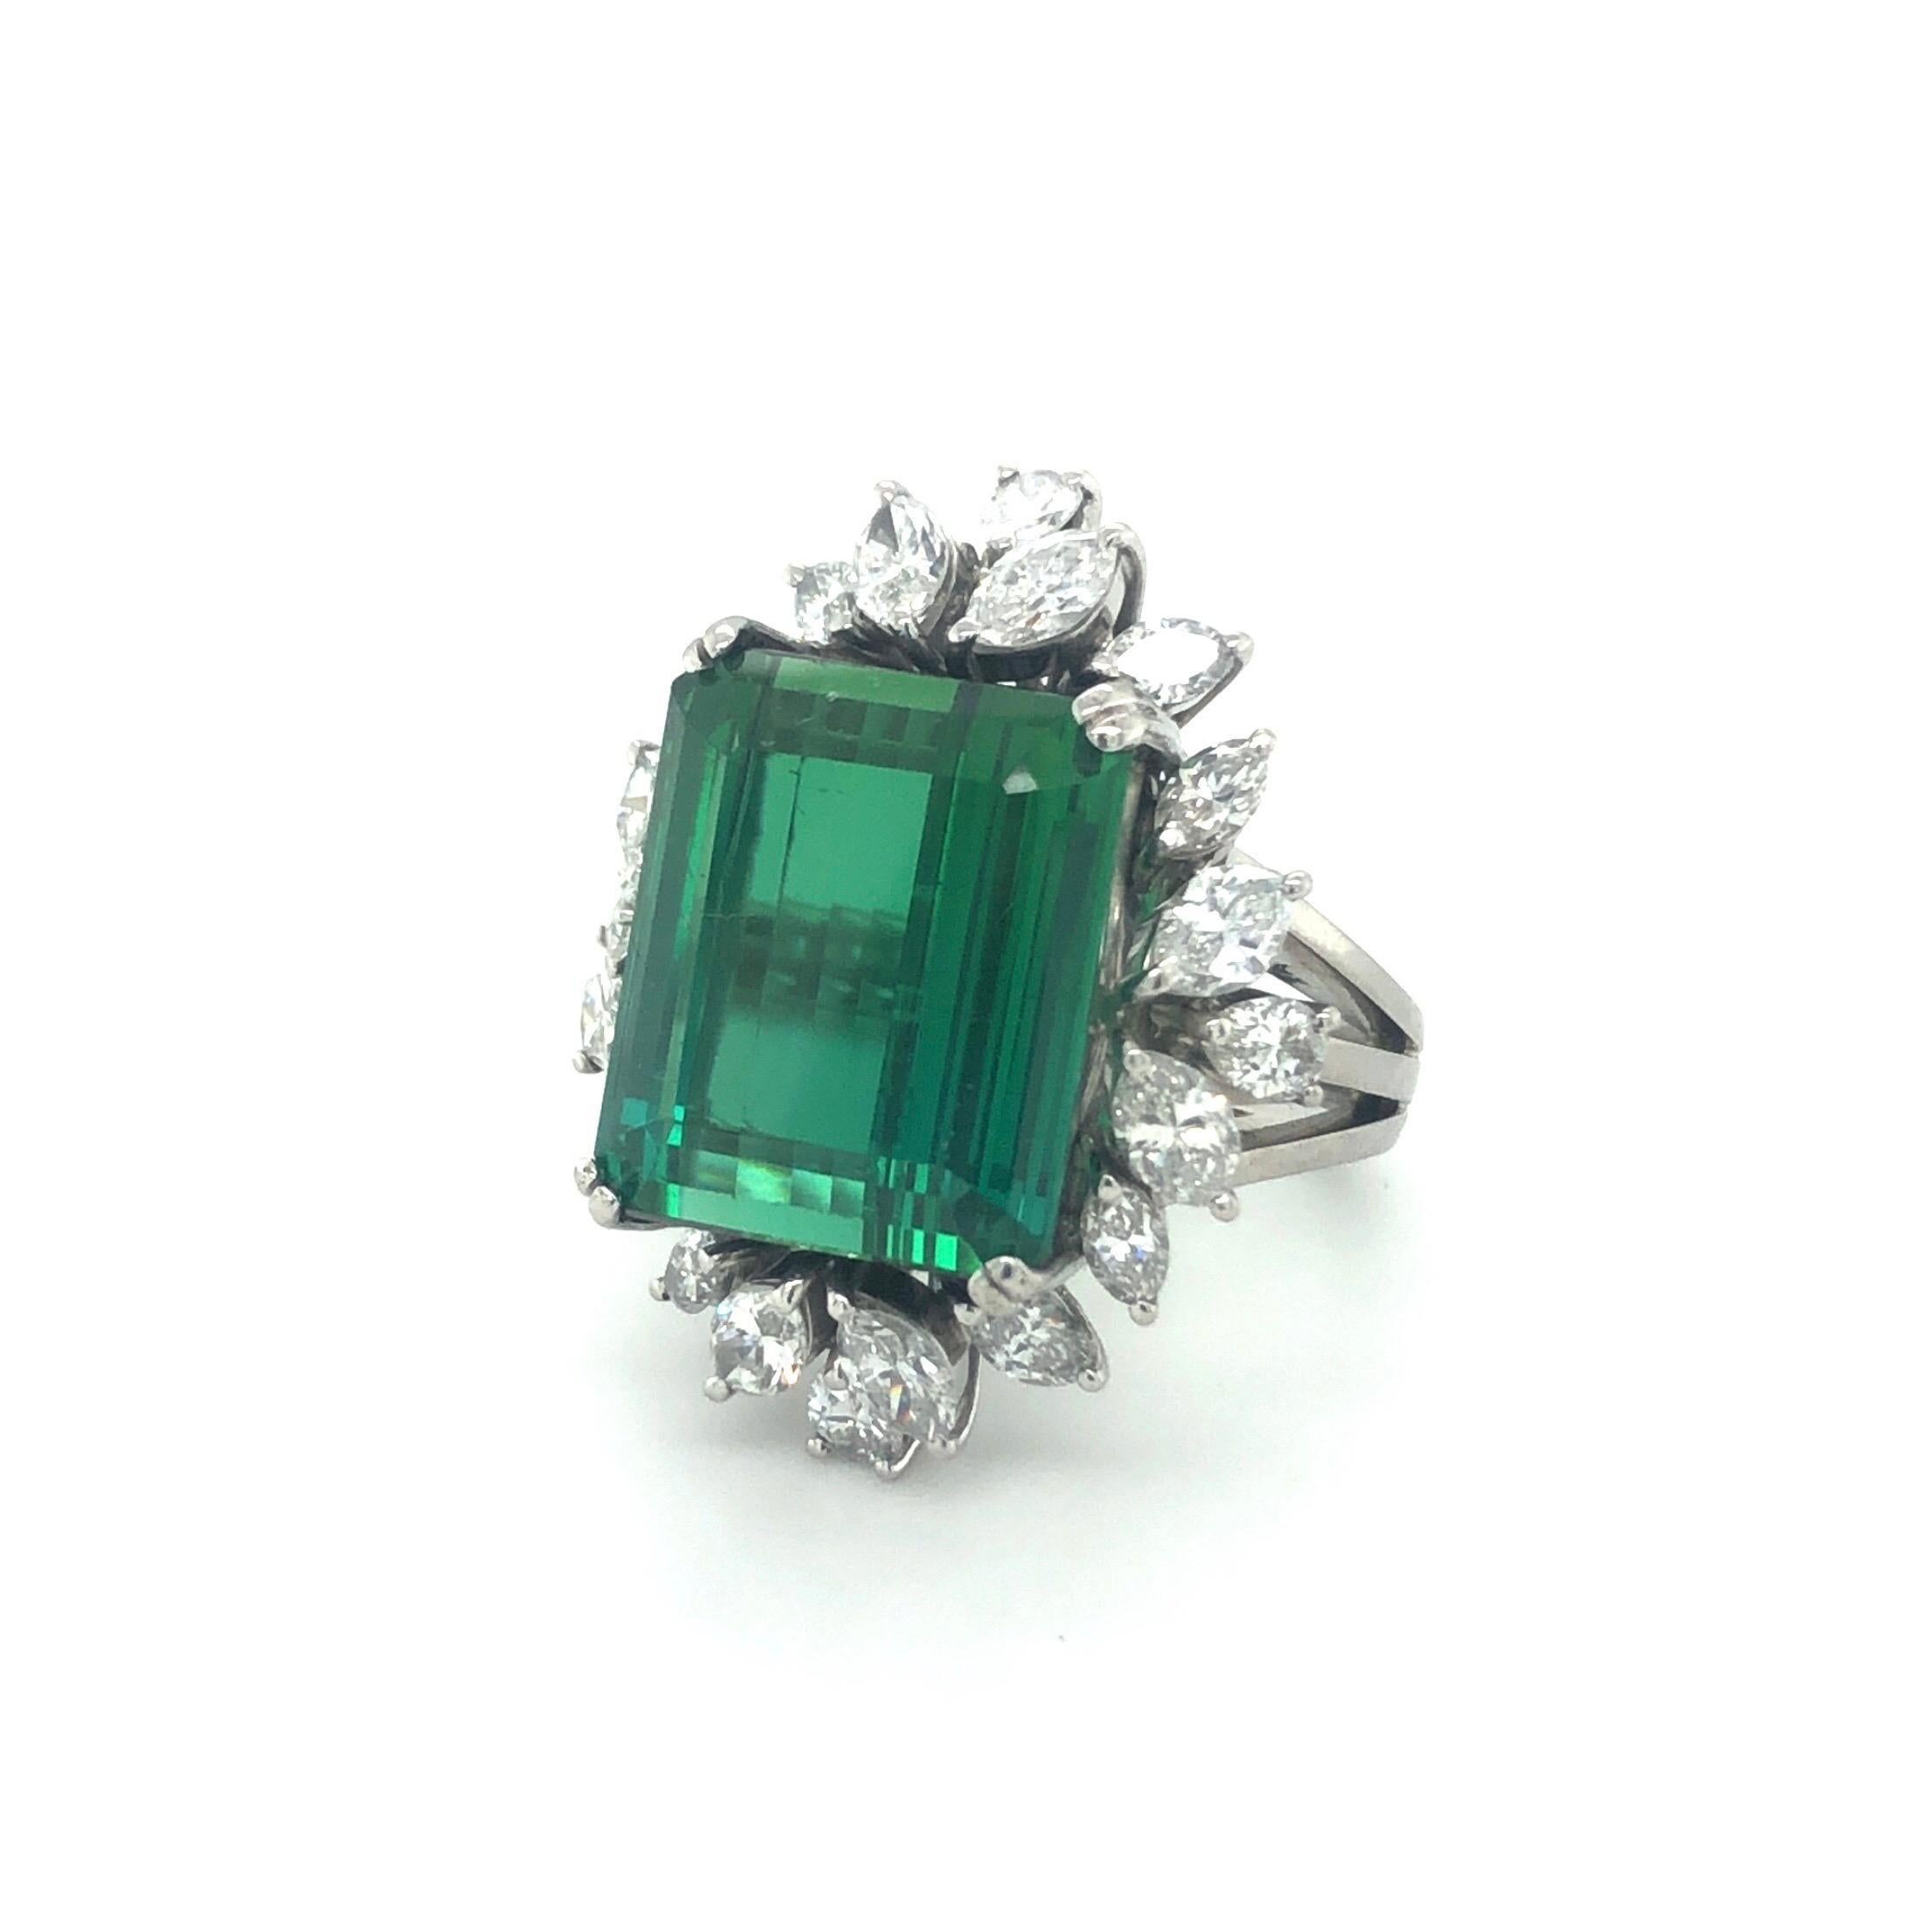 18 karat white gold green tourmaline diamond cocktail ring.
Splendid cocktail ring set with a vivid green octagonal tourmaline of circa 13 carats surrounded by an harmoniously arranged entourage consisting of 4 pear-shape and 16 marquise-shape